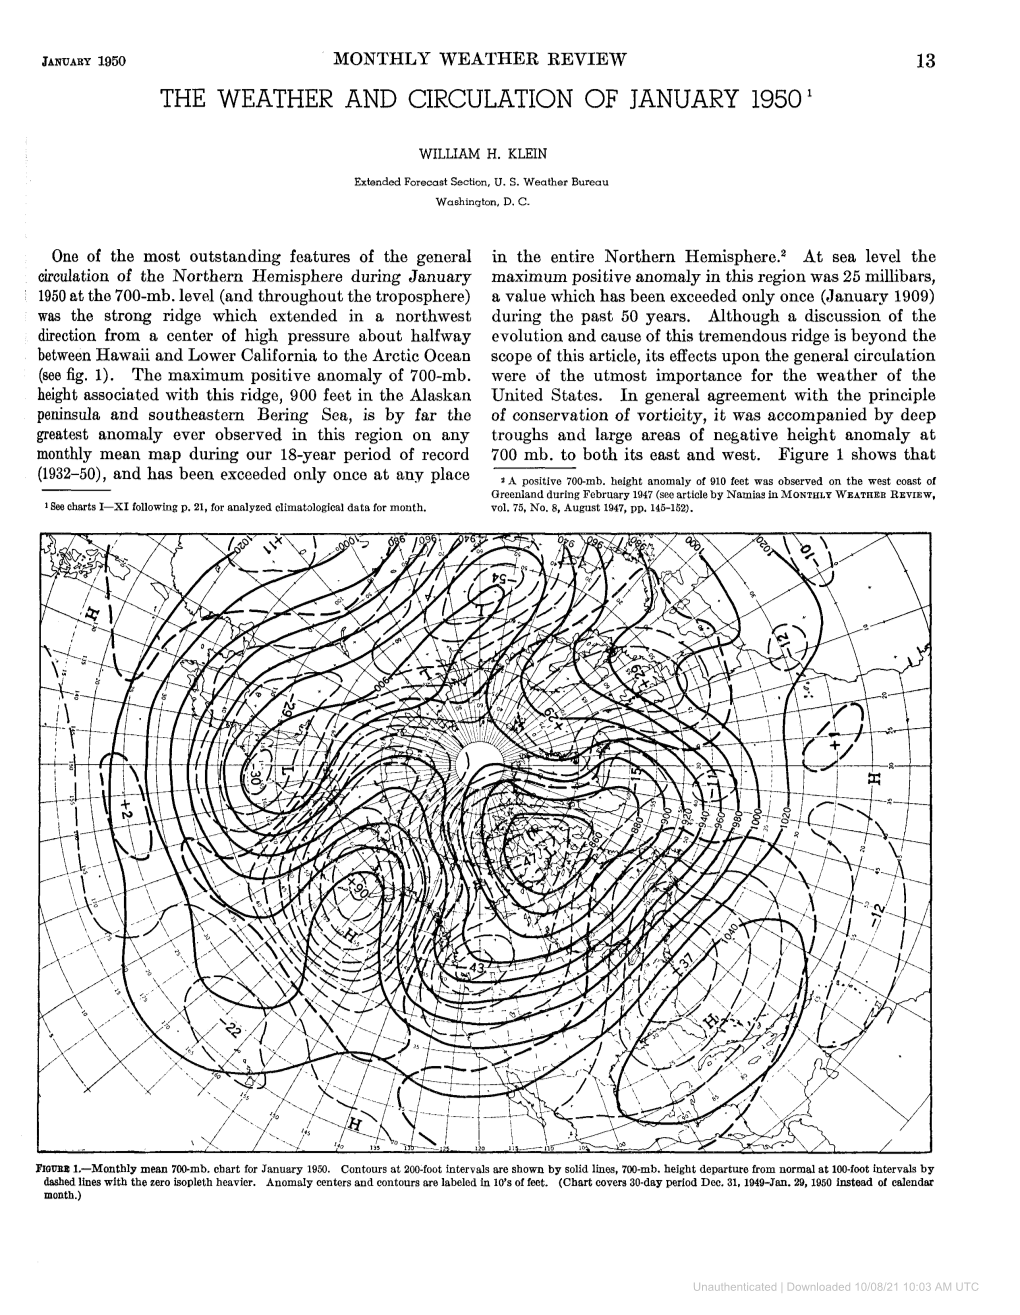 The Weather and Circulation of January 1950